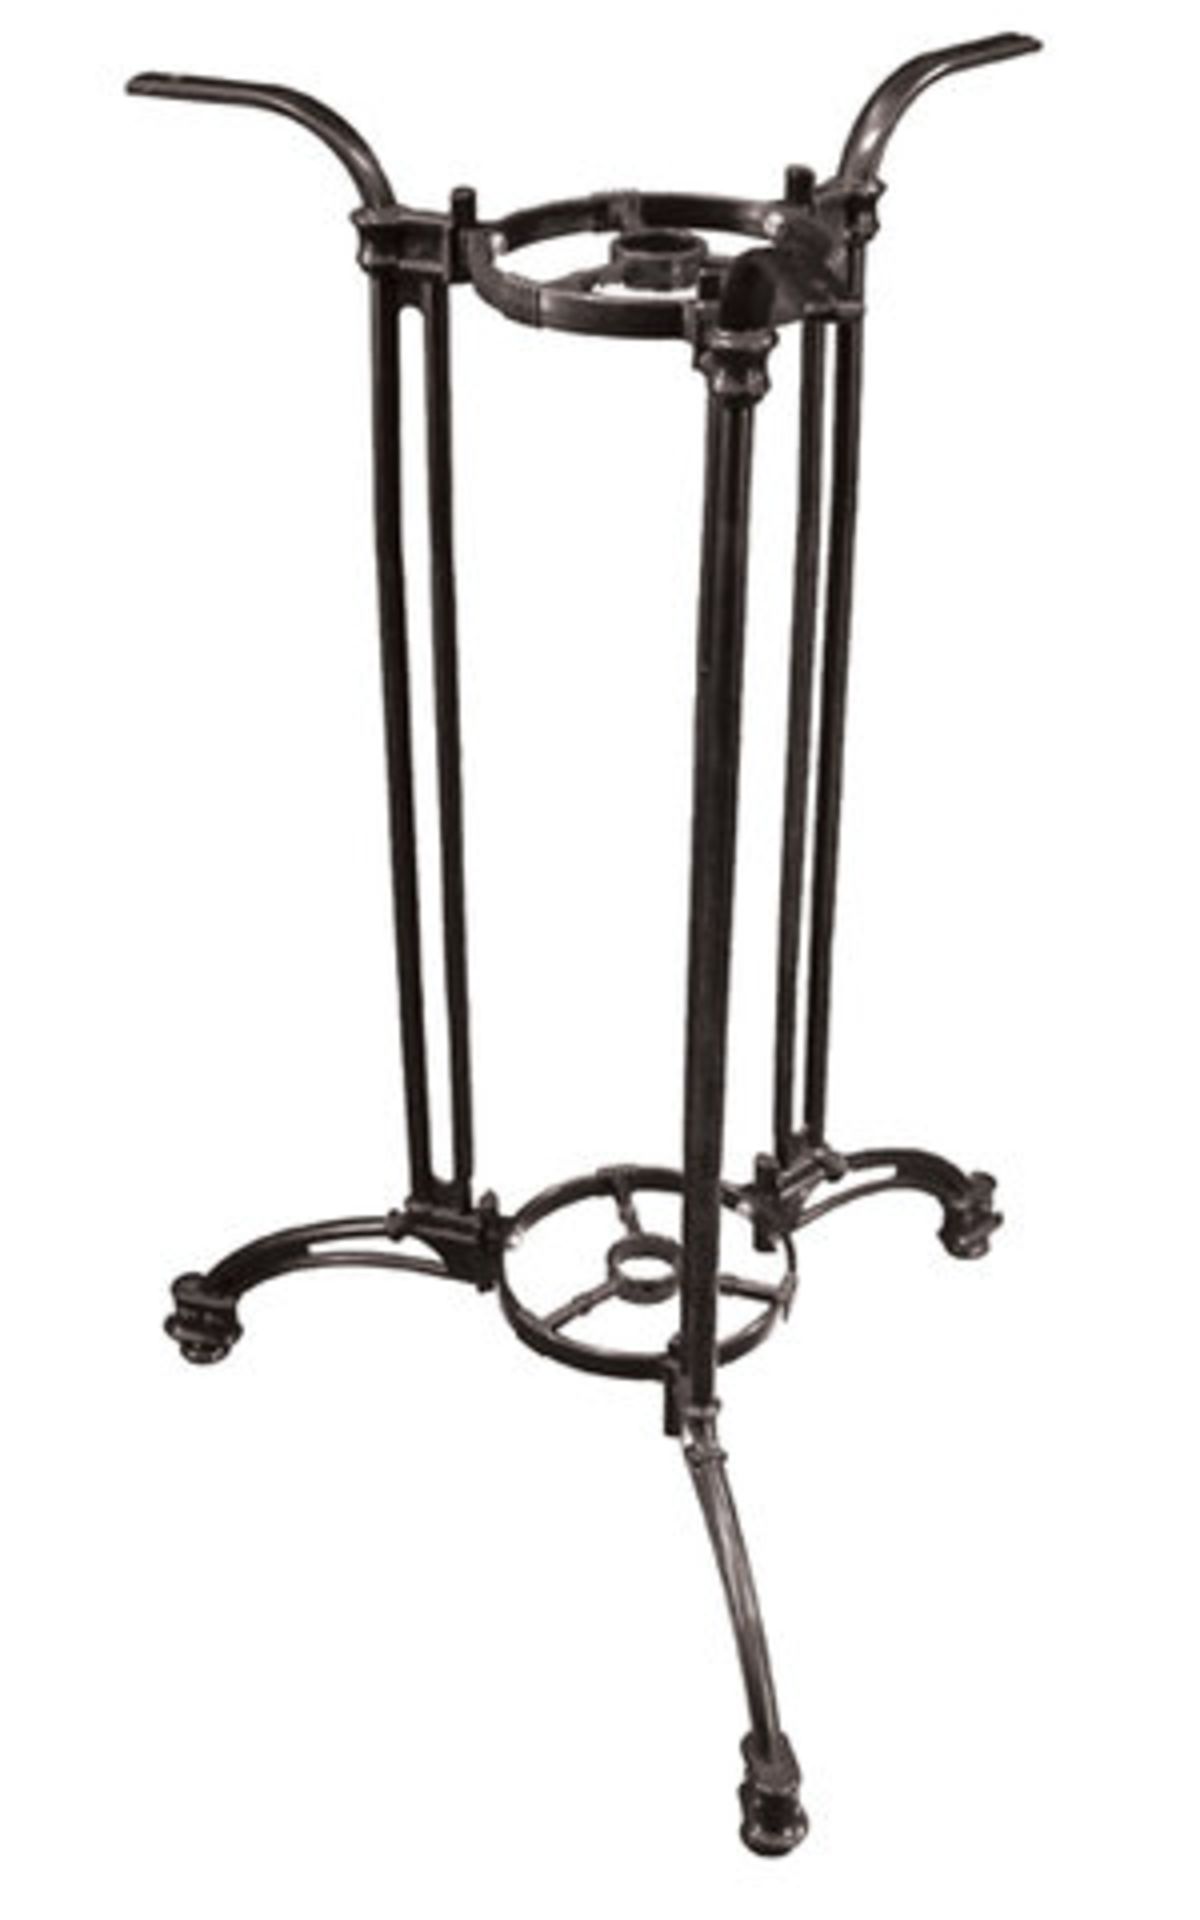 Andalusia 3 Large Bar Height Base - TG31BH. Cast Aluminum/Epoxy Powder Coat. Dimensions: 30" x 30" x